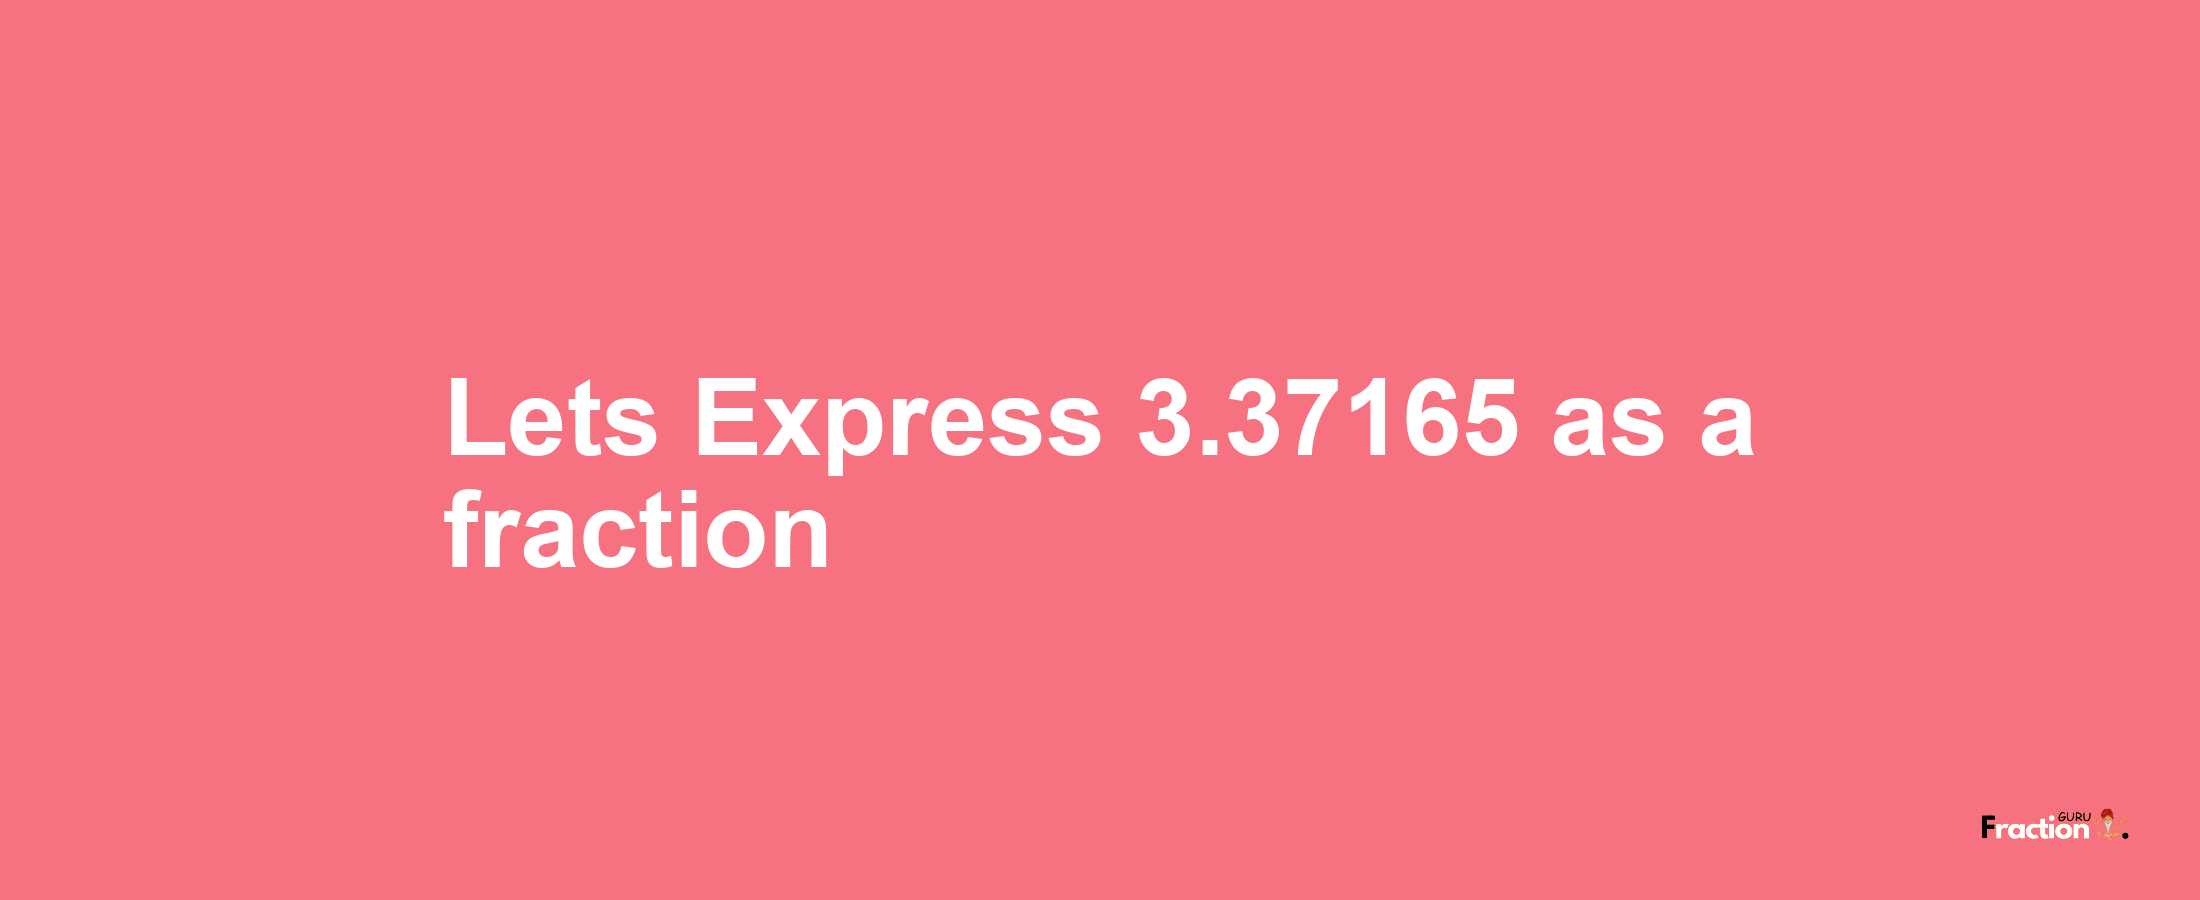 Lets Express 3.37165 as afraction